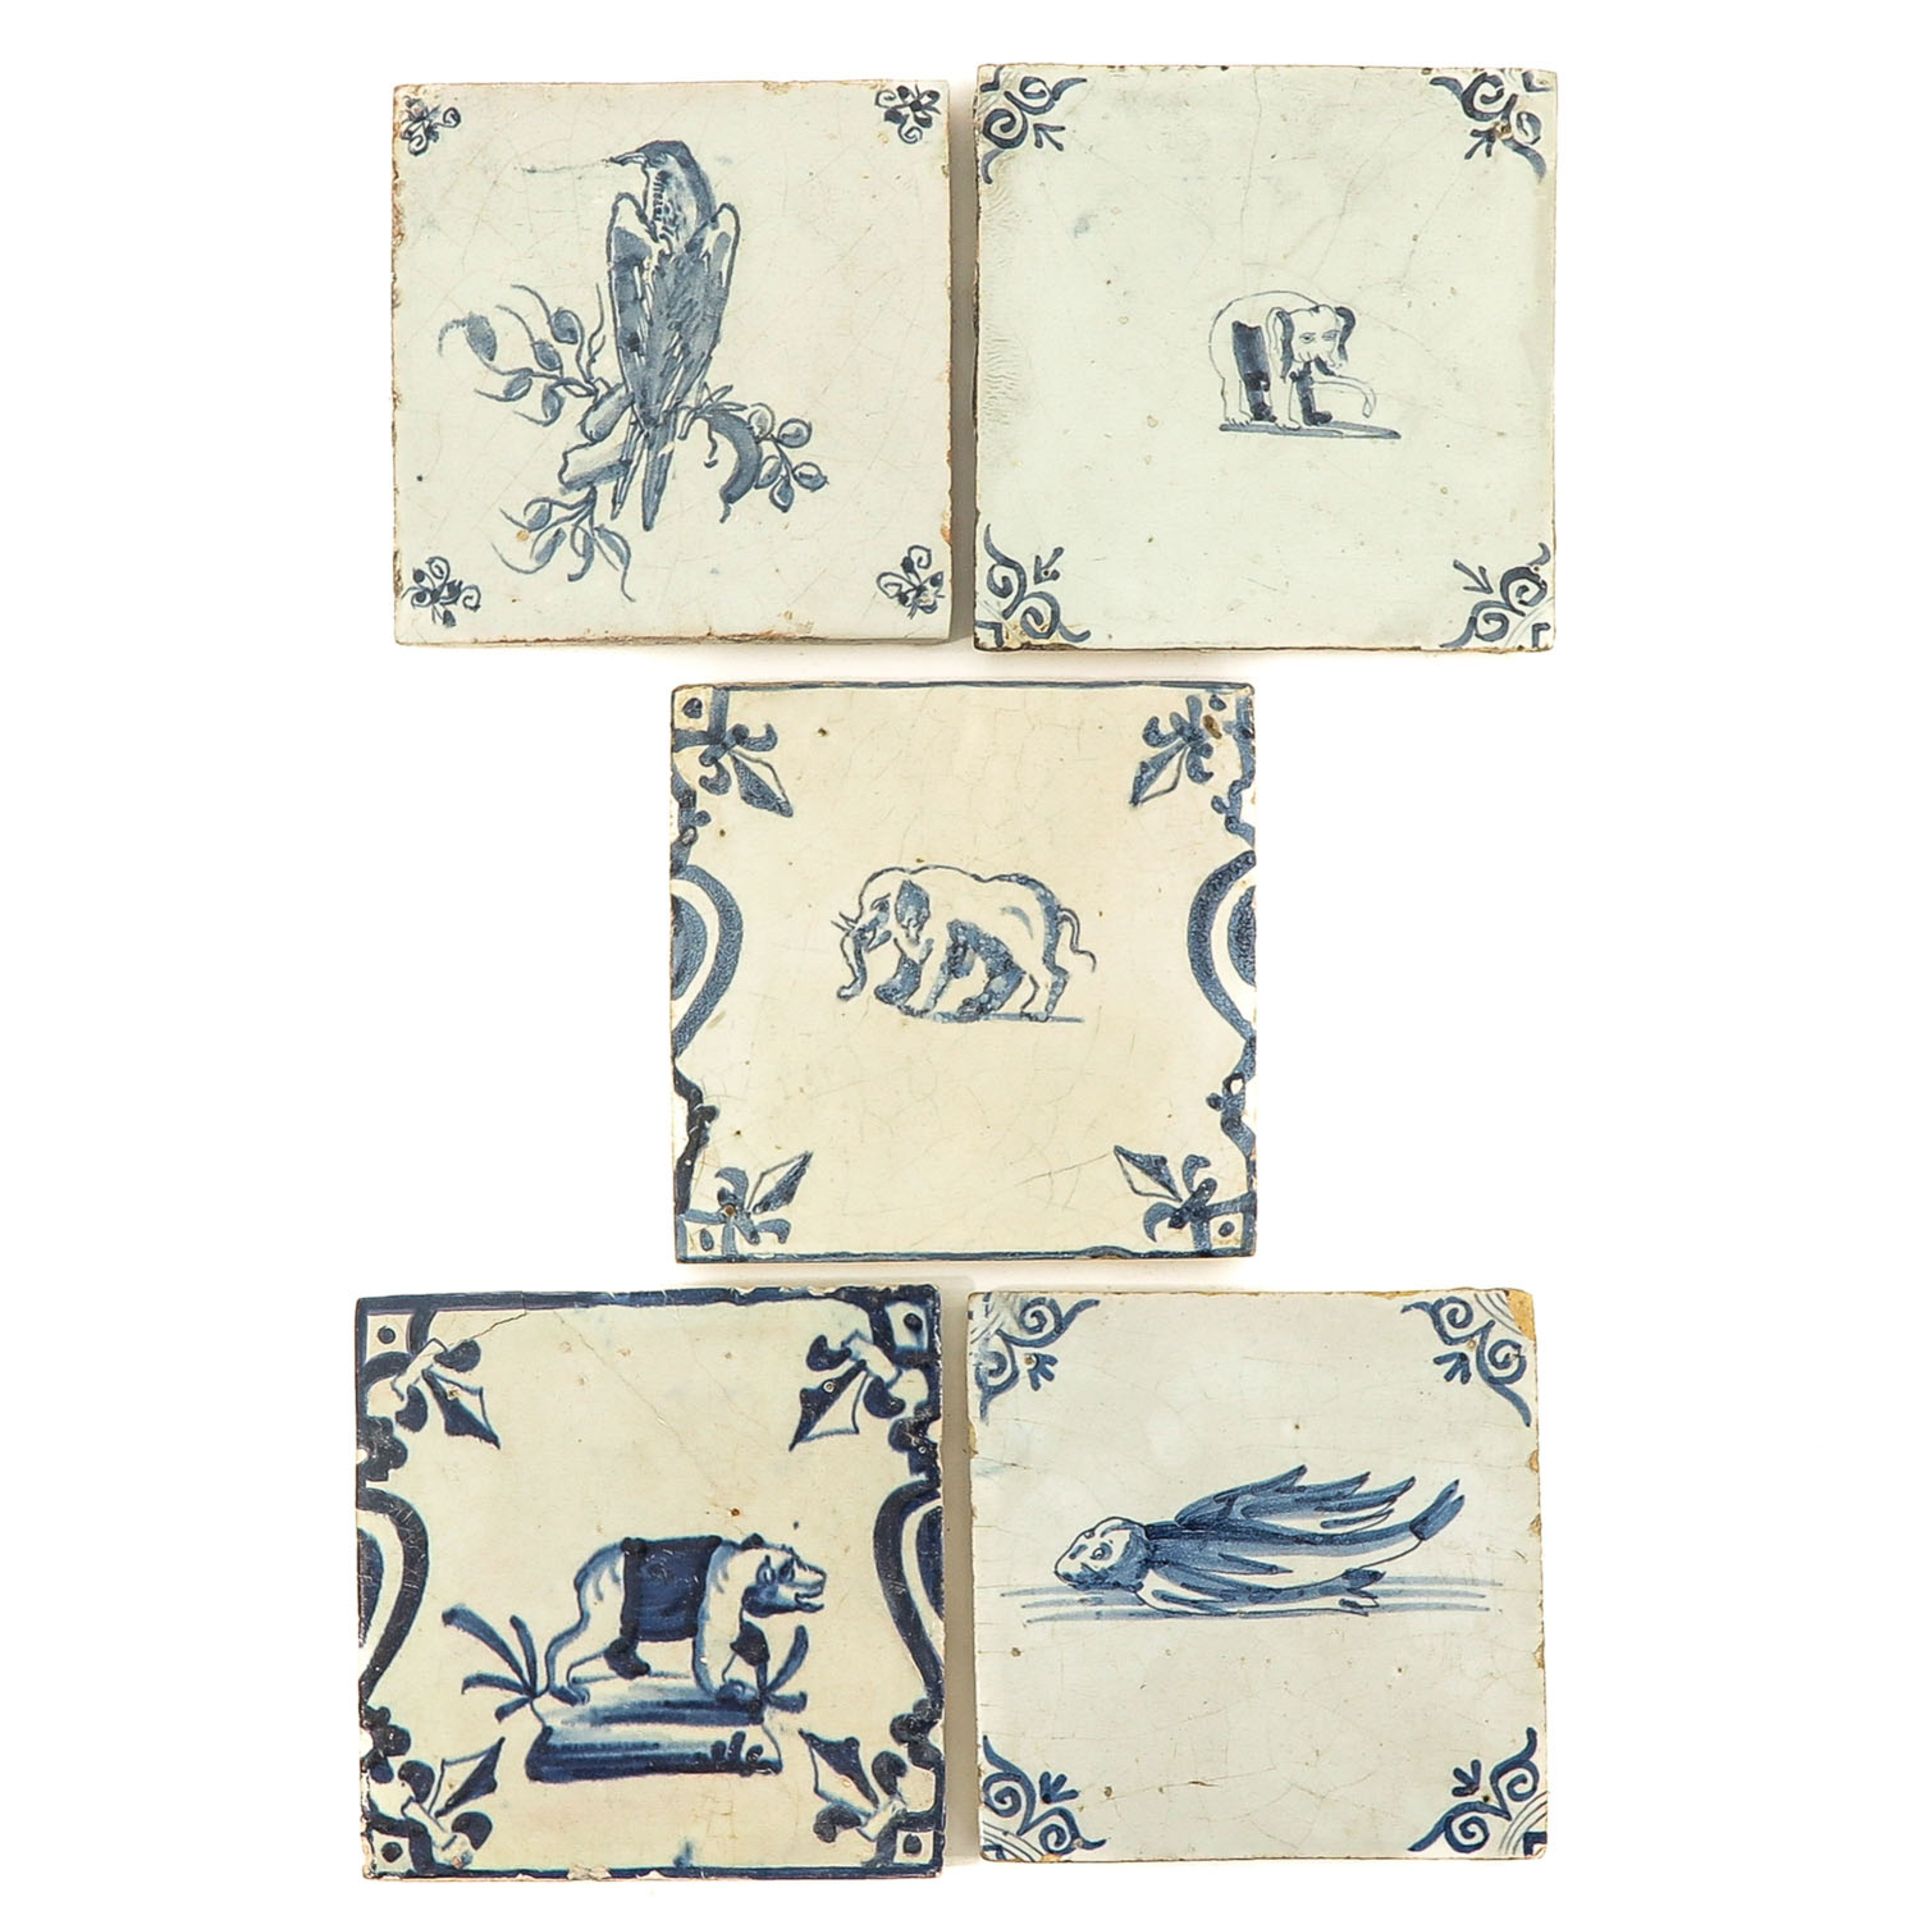 A Collection of 5 Dutch 17th Century Tiles